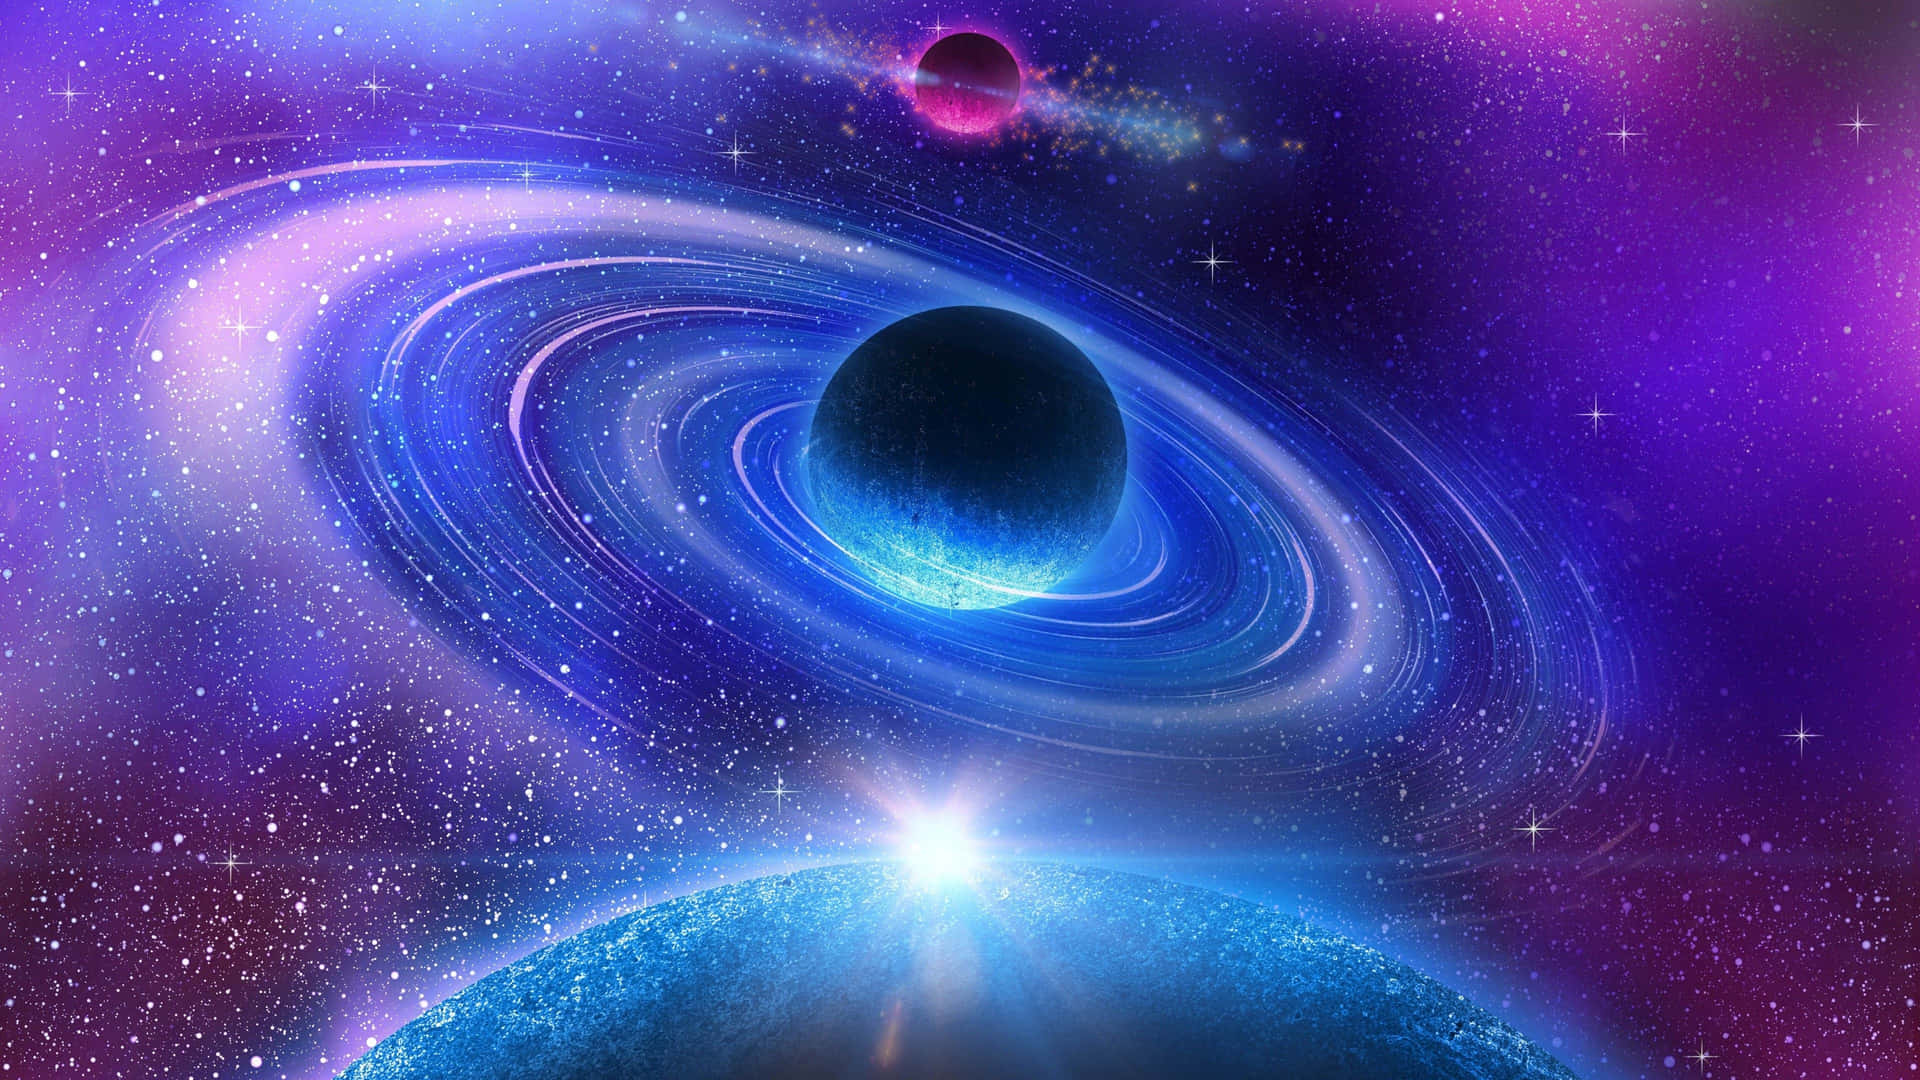 Blue And Purple Solar System Wallpaper